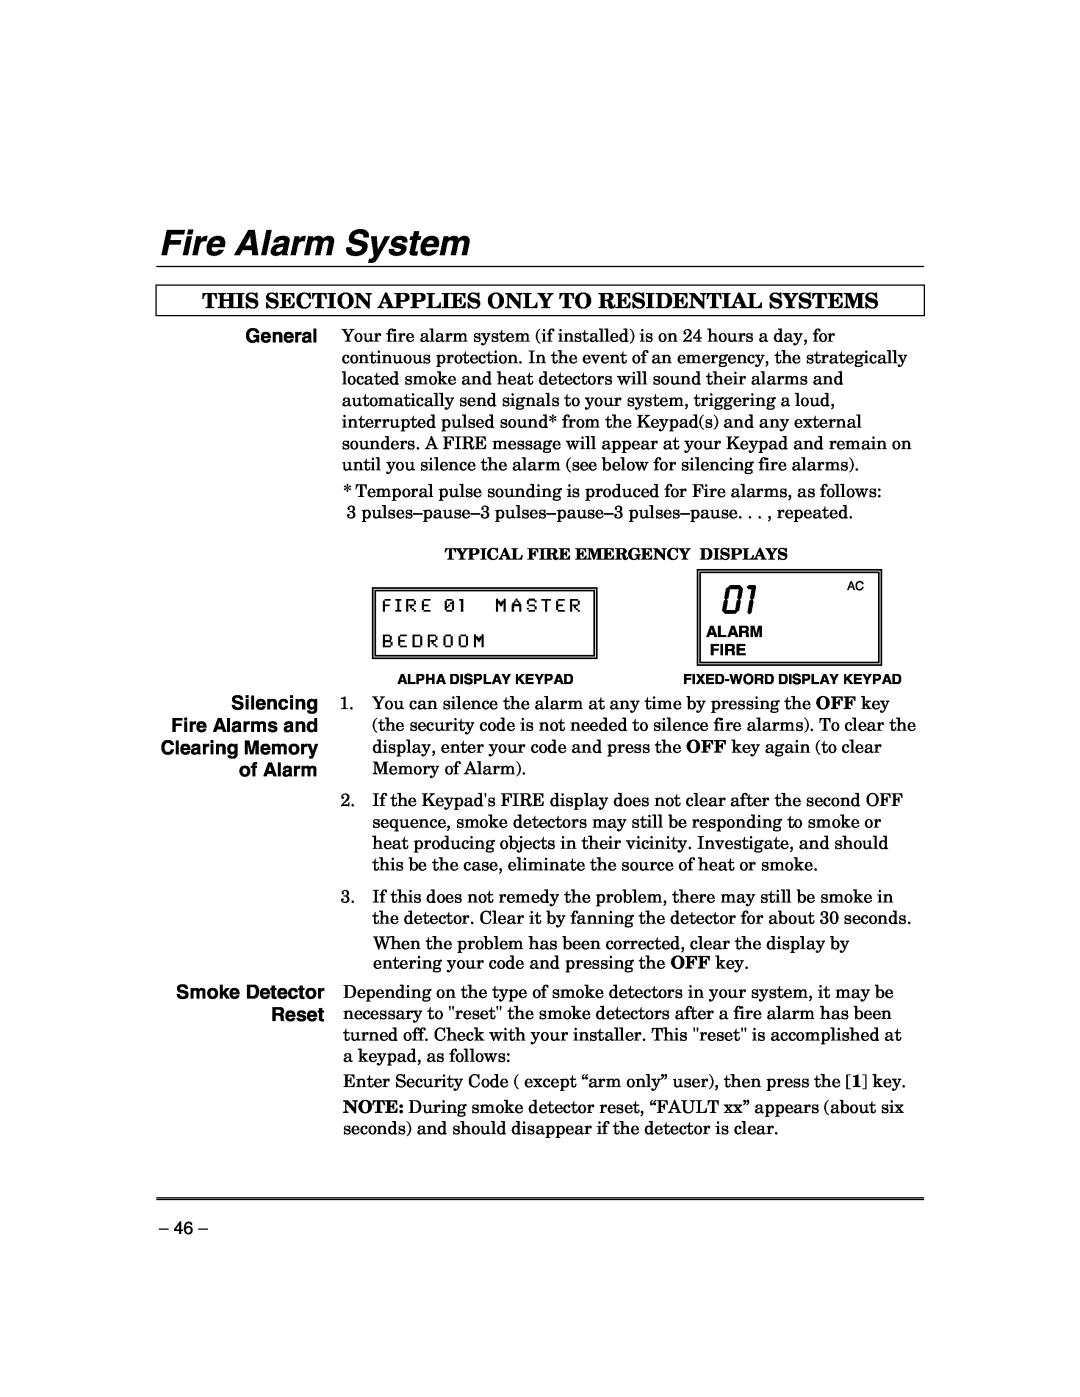 Honeywell VISTA-21IPSIA manual Fire Alarm System, This Section Applies Only To Residential Systems, F I R E 0 1 M A S T E R 